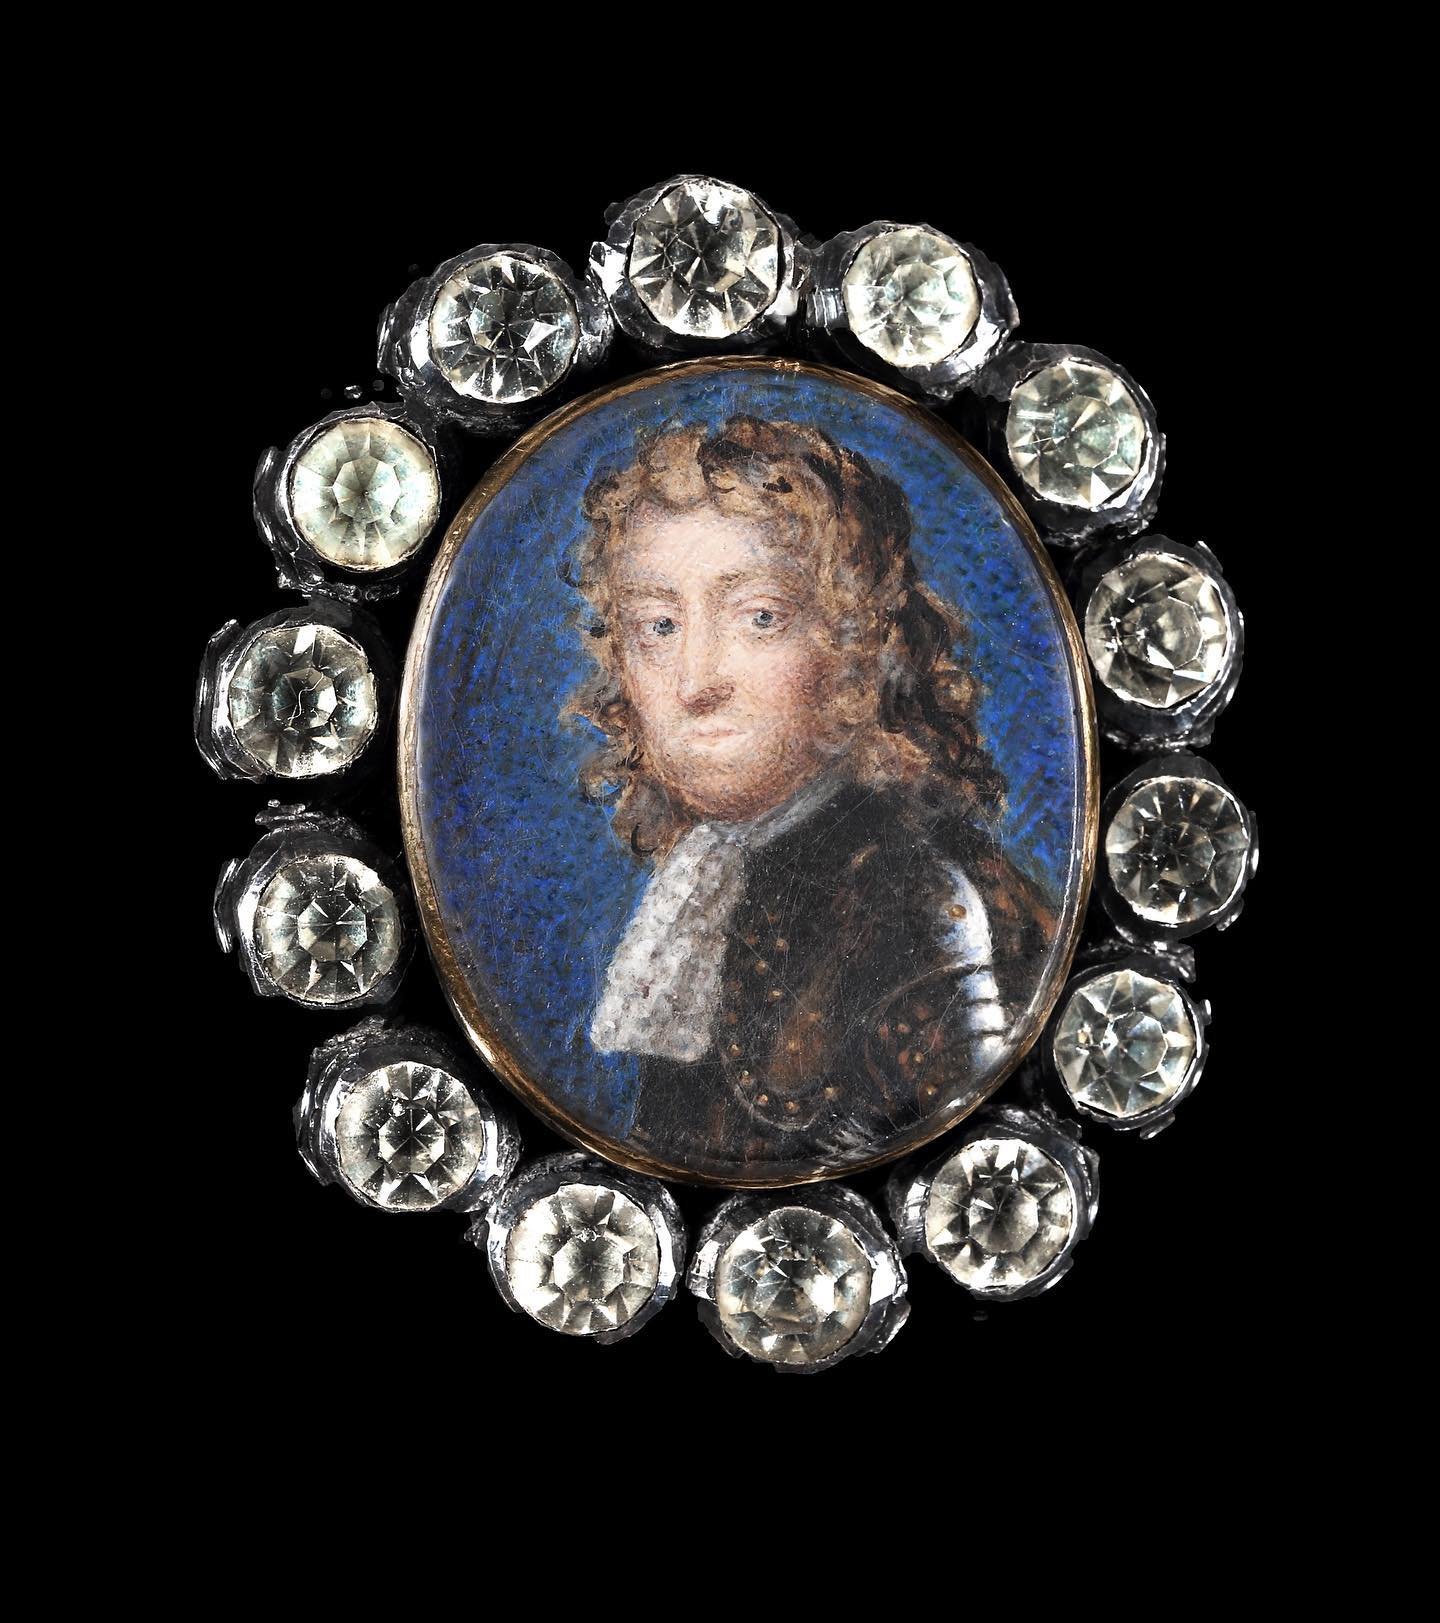 Praised by George Vertue in his notebooks, this miniature, available on our website, is by 17th century female miniaturist Susannah-Penelope Rosse (c.1655-1700). 

 

The daughter of the miniature painter Richard Gibson, Susannah-Penelope Rosse was o